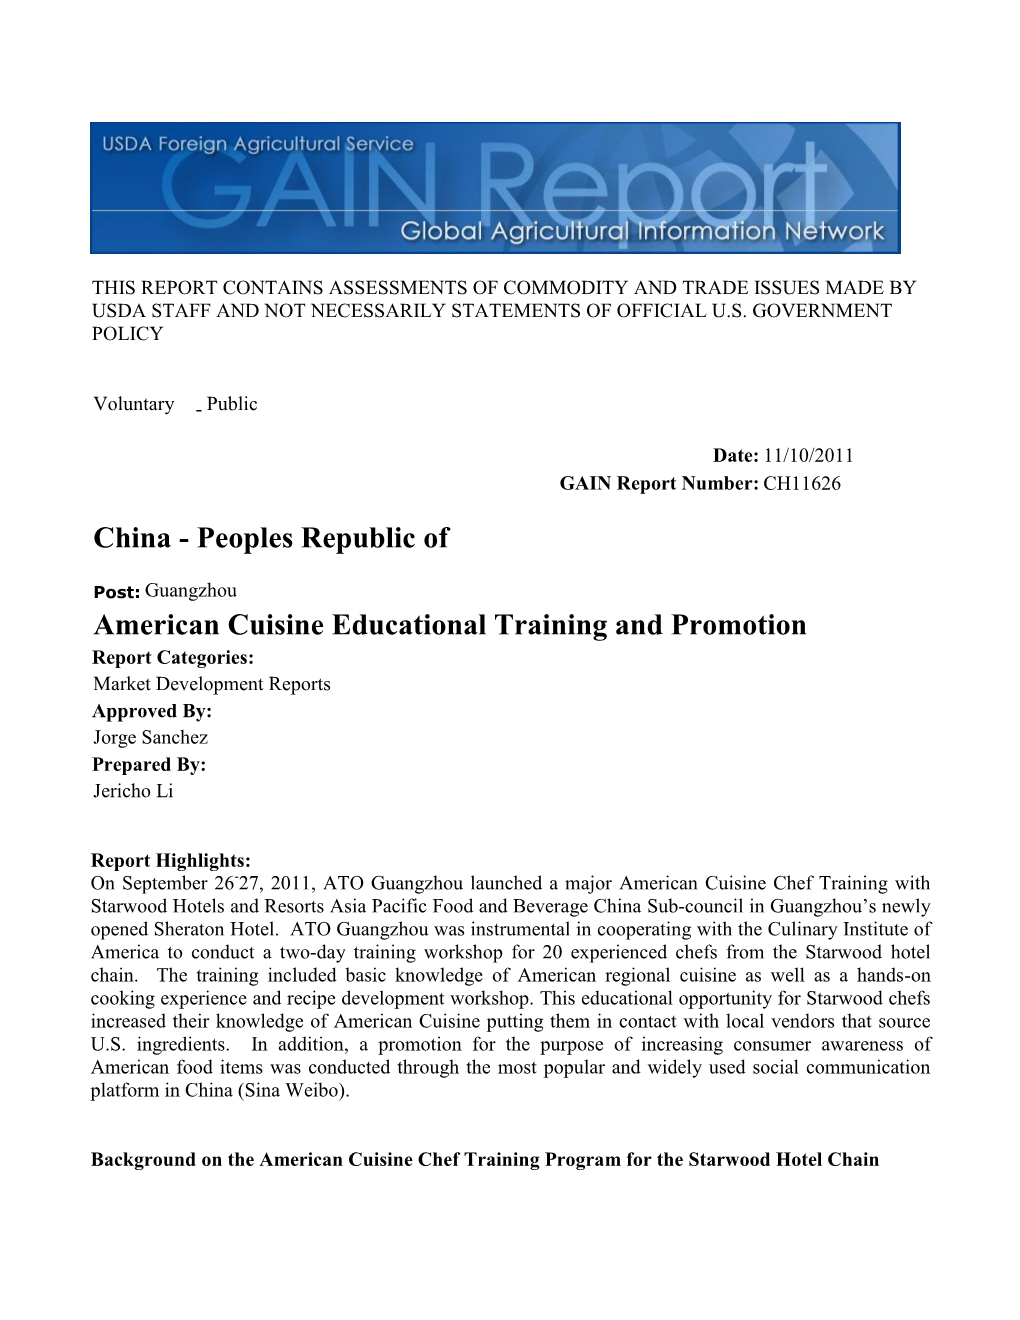 American Cuisine Educational Training and Promotion China